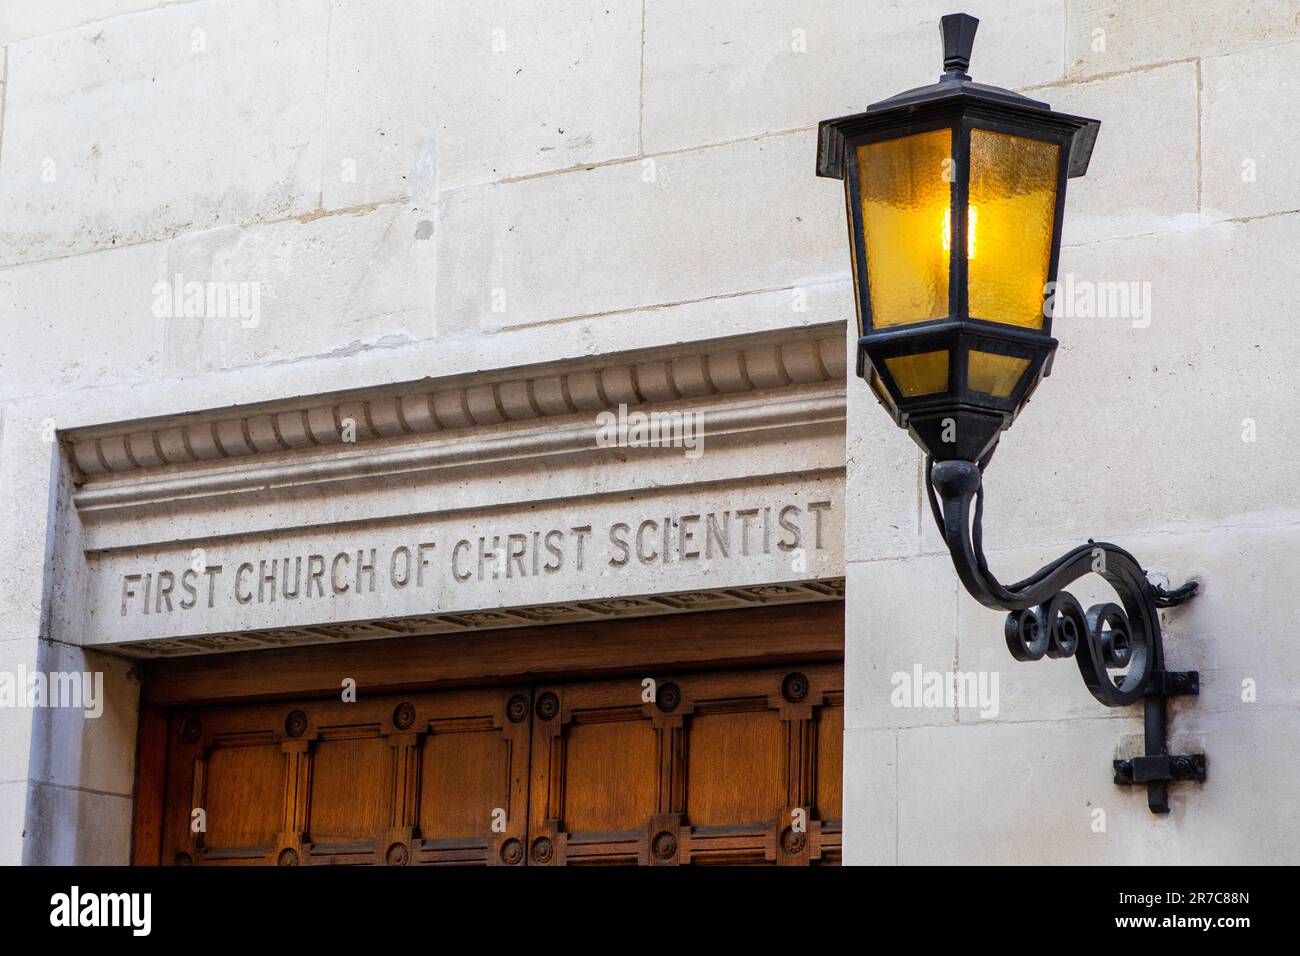 First Church of Christ Scientist sign at Cadogan Hall in London, UK. The building was a church of Christ Scientist but is now known as Cadogan Hall - Stock Photo